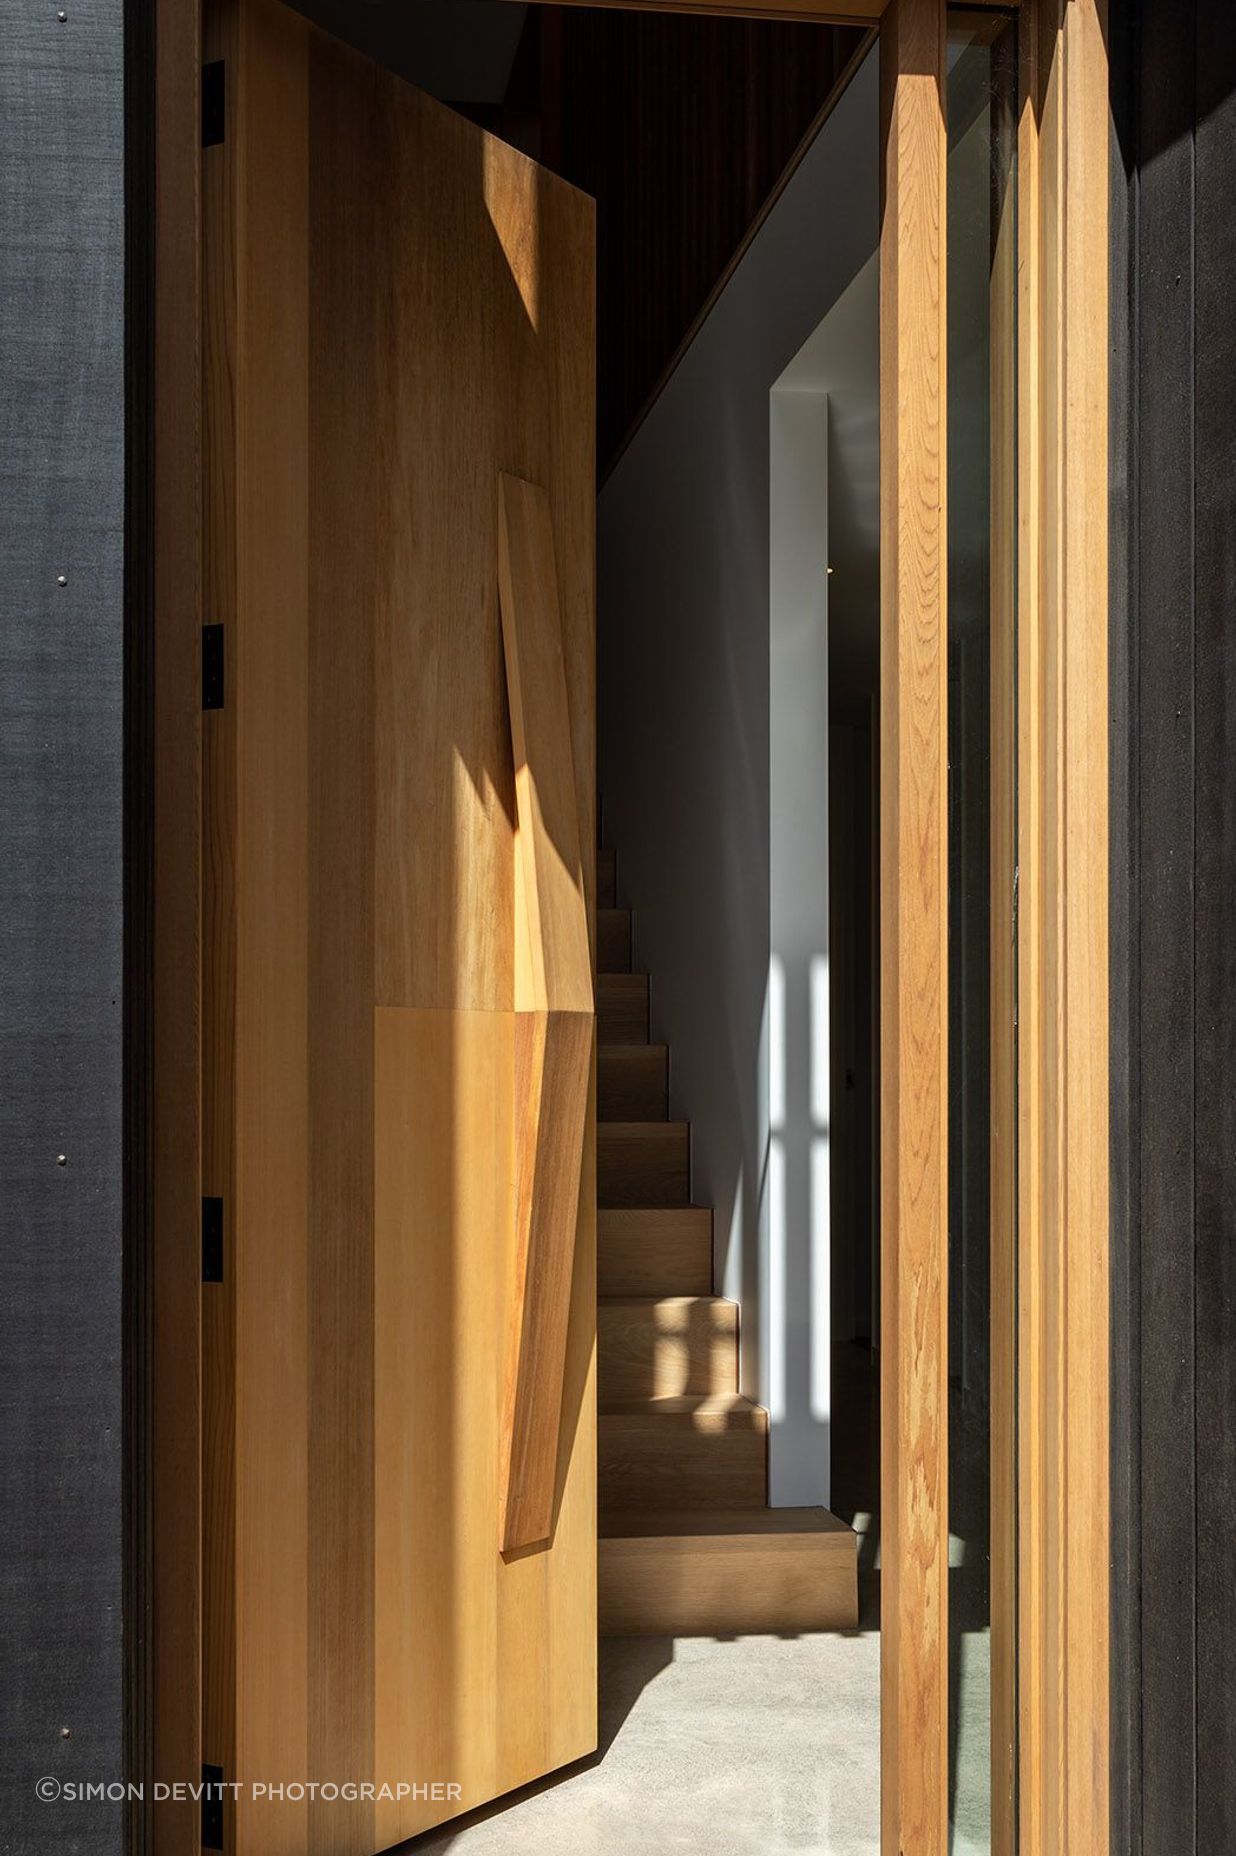 The door opens onto a timber staircase.